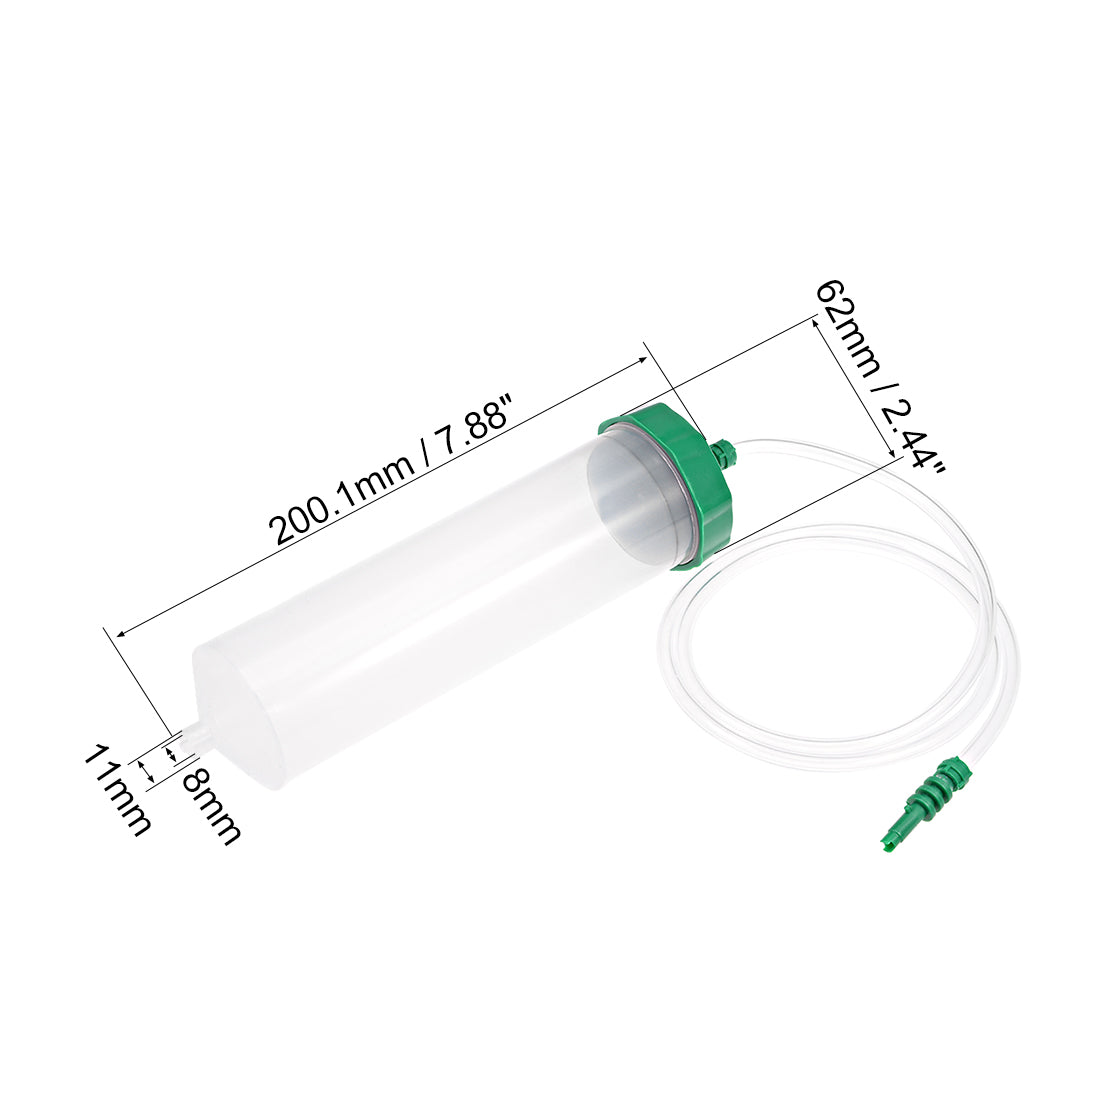 uxcell Uxcell Air Tubing Glue Dispenser Syringes 300cc Clear w Adapter for Industrial, 2 Pcs (Plastic Cover)